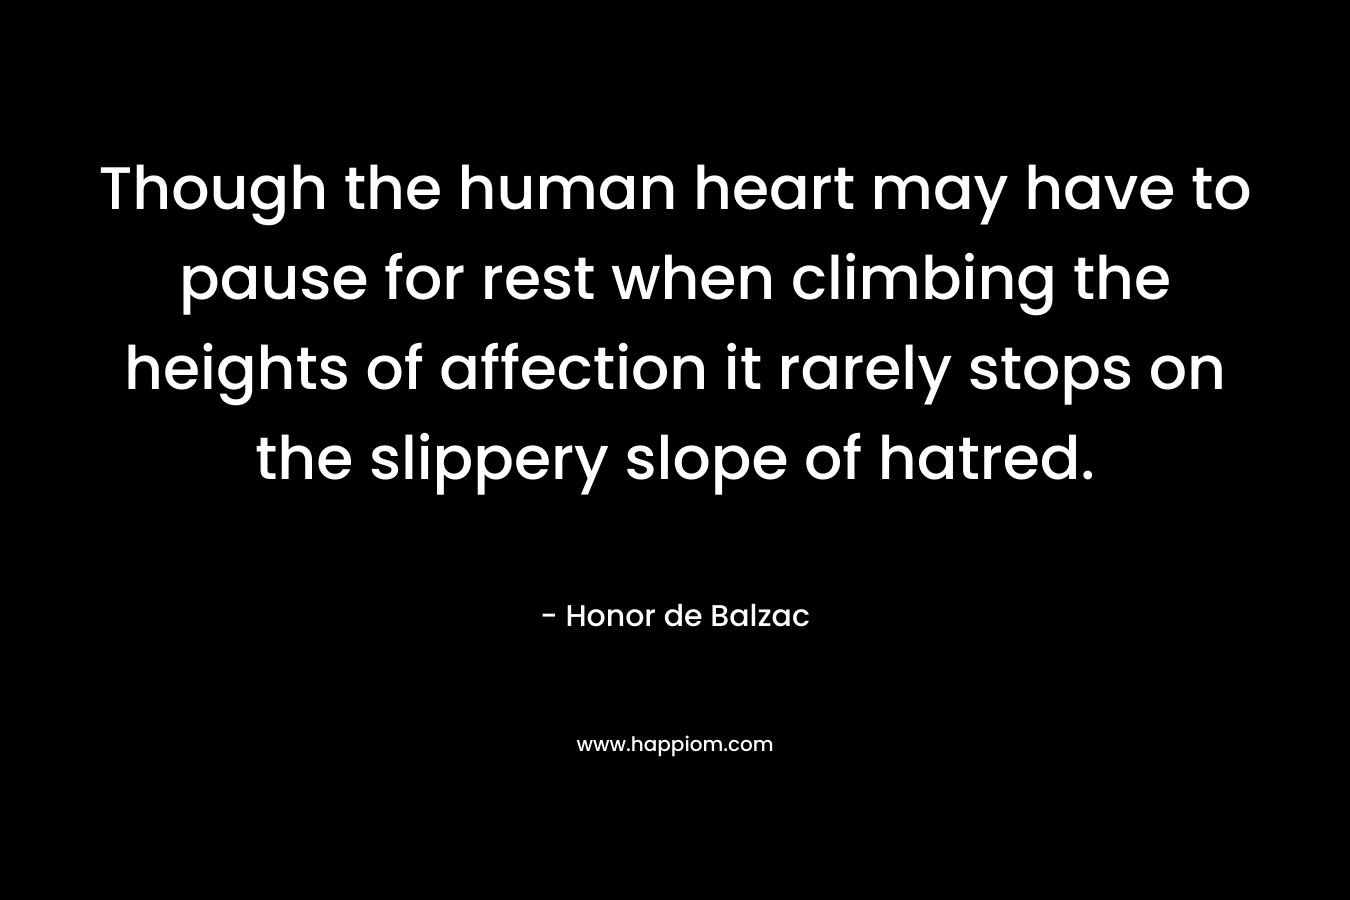 Though the human heart may have to pause for rest when climbing the heights of affection it rarely stops on the slippery slope of hatred. – Honor de Balzac